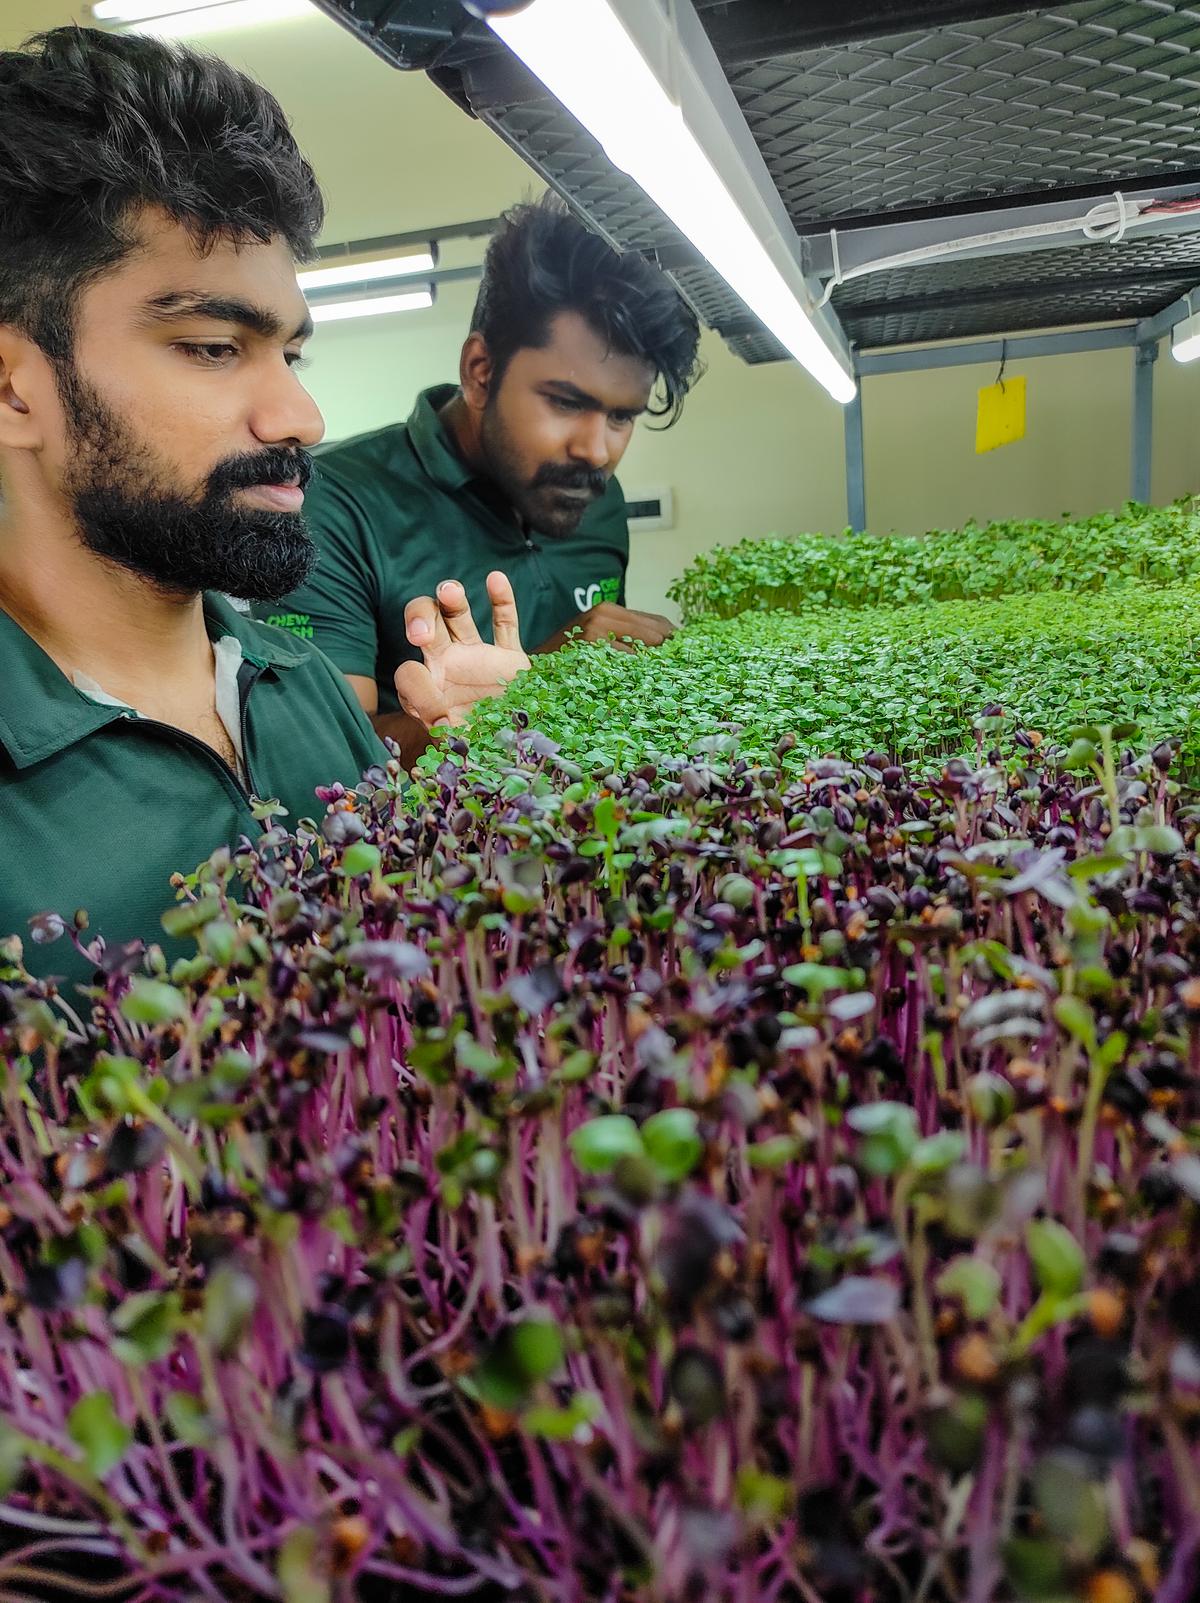 (From left) Rahul GB and Ananthu Raj RC in the room where they grow microgreens